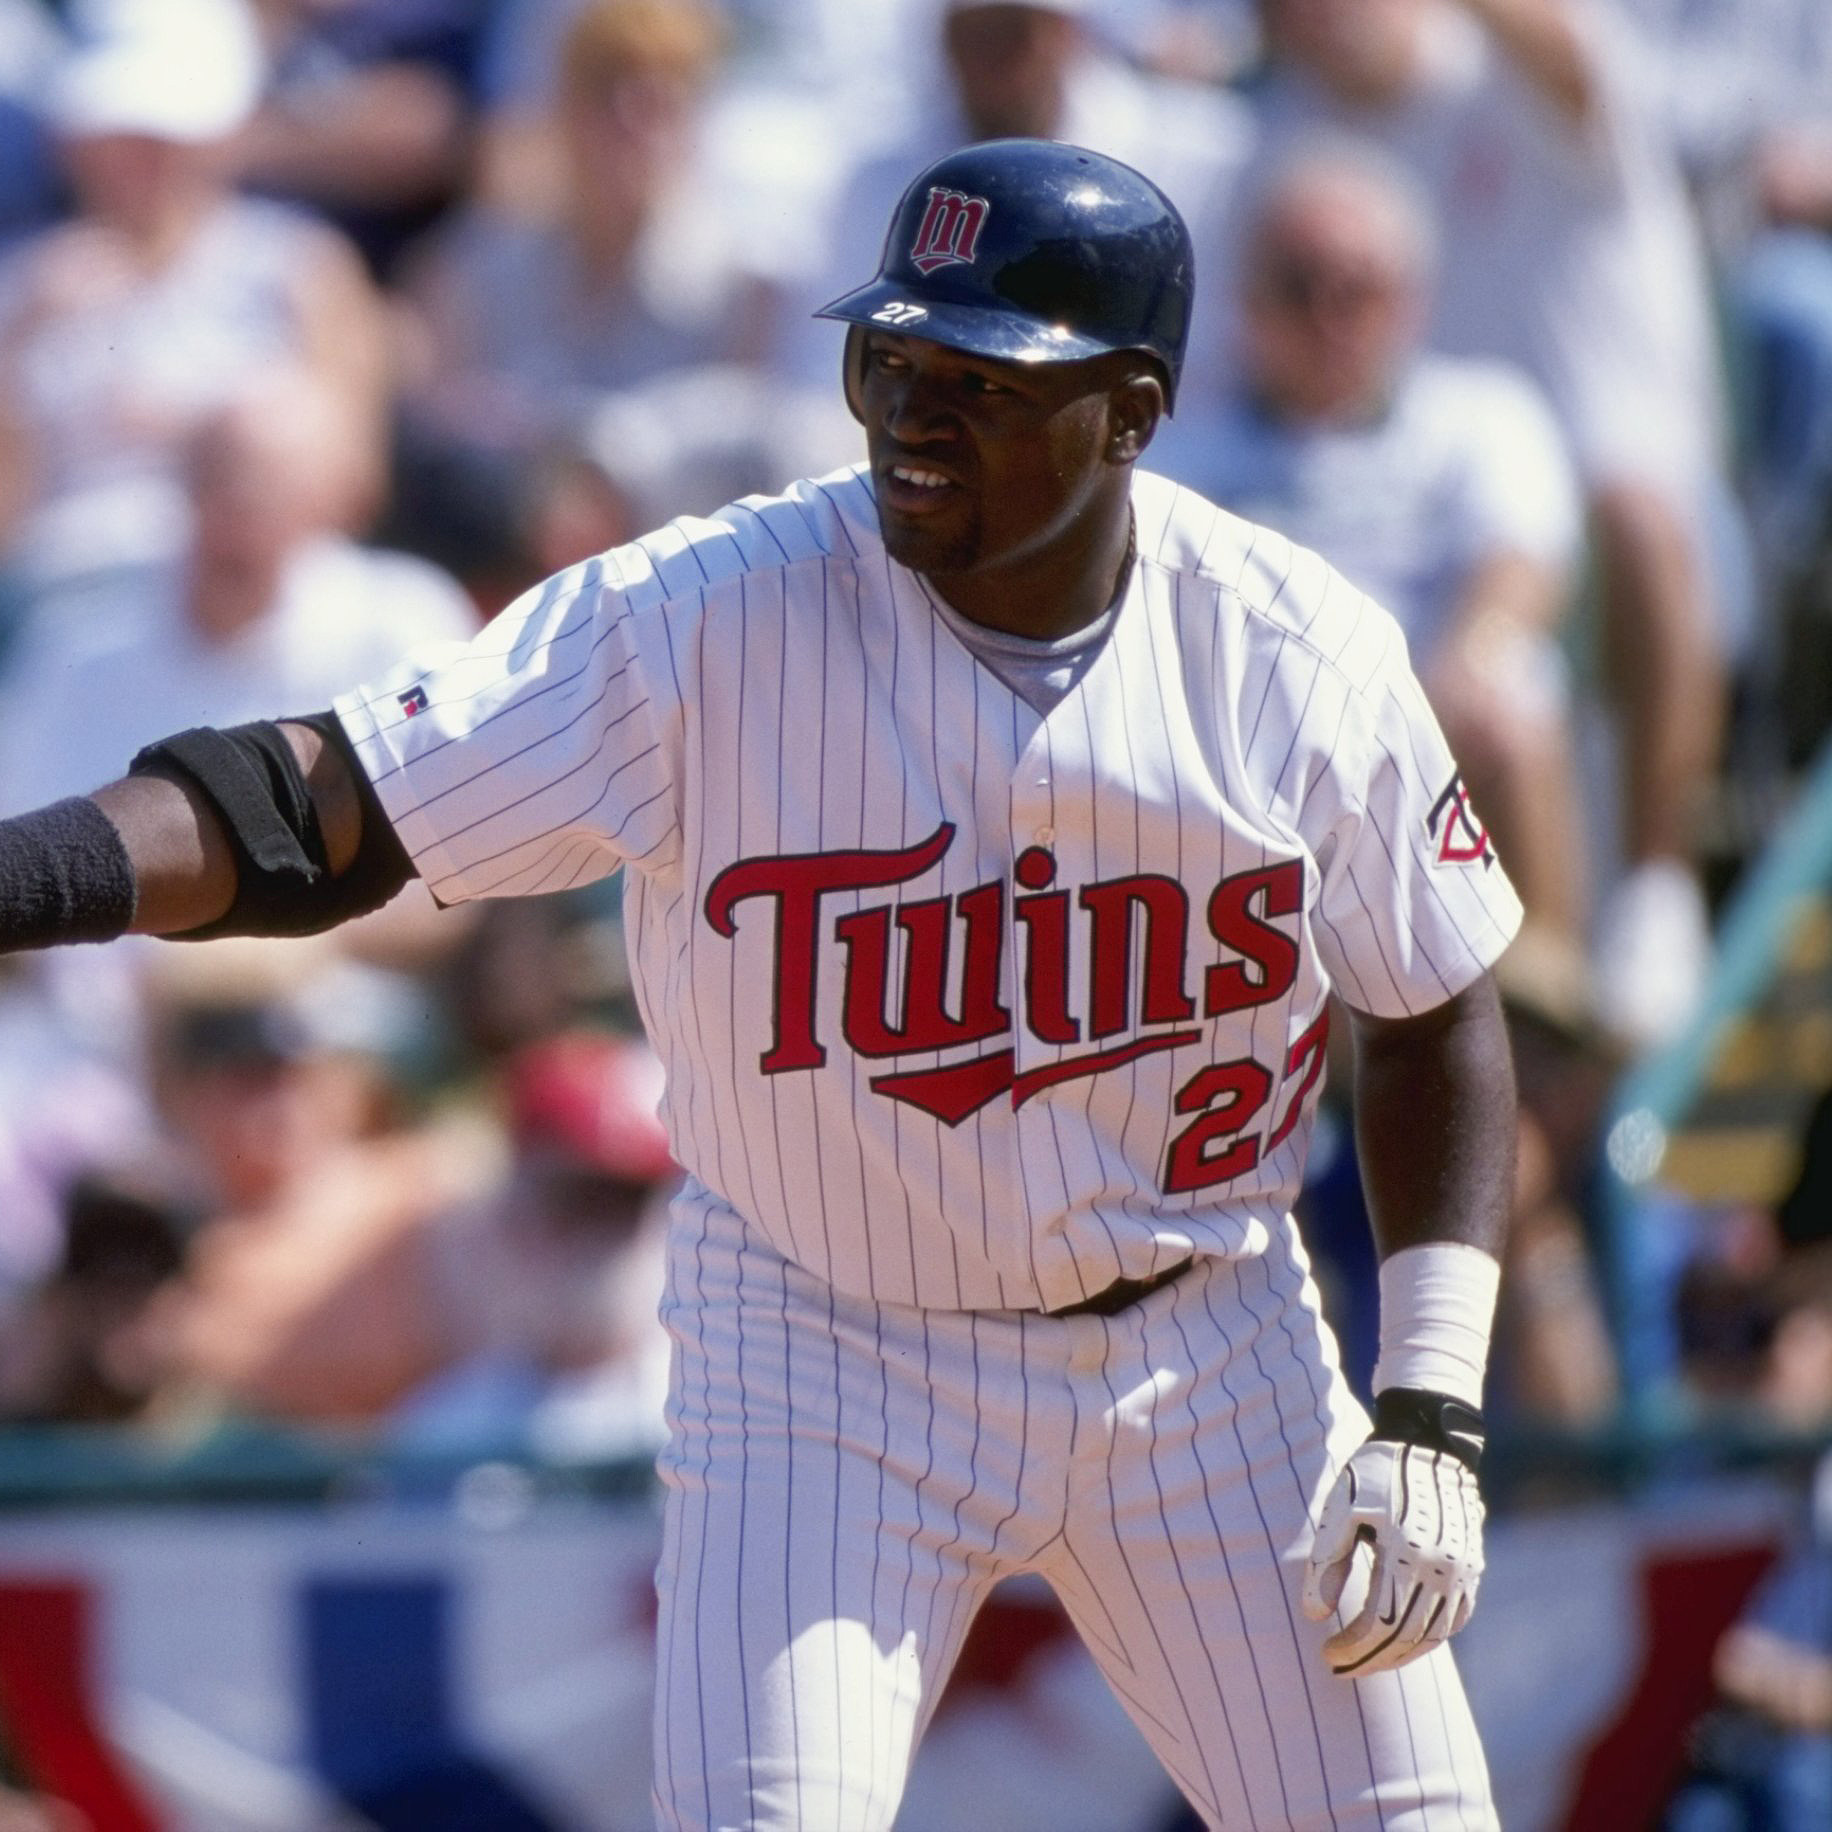 The Curse of David Ortiz: Why the Minnesota Twins will never win